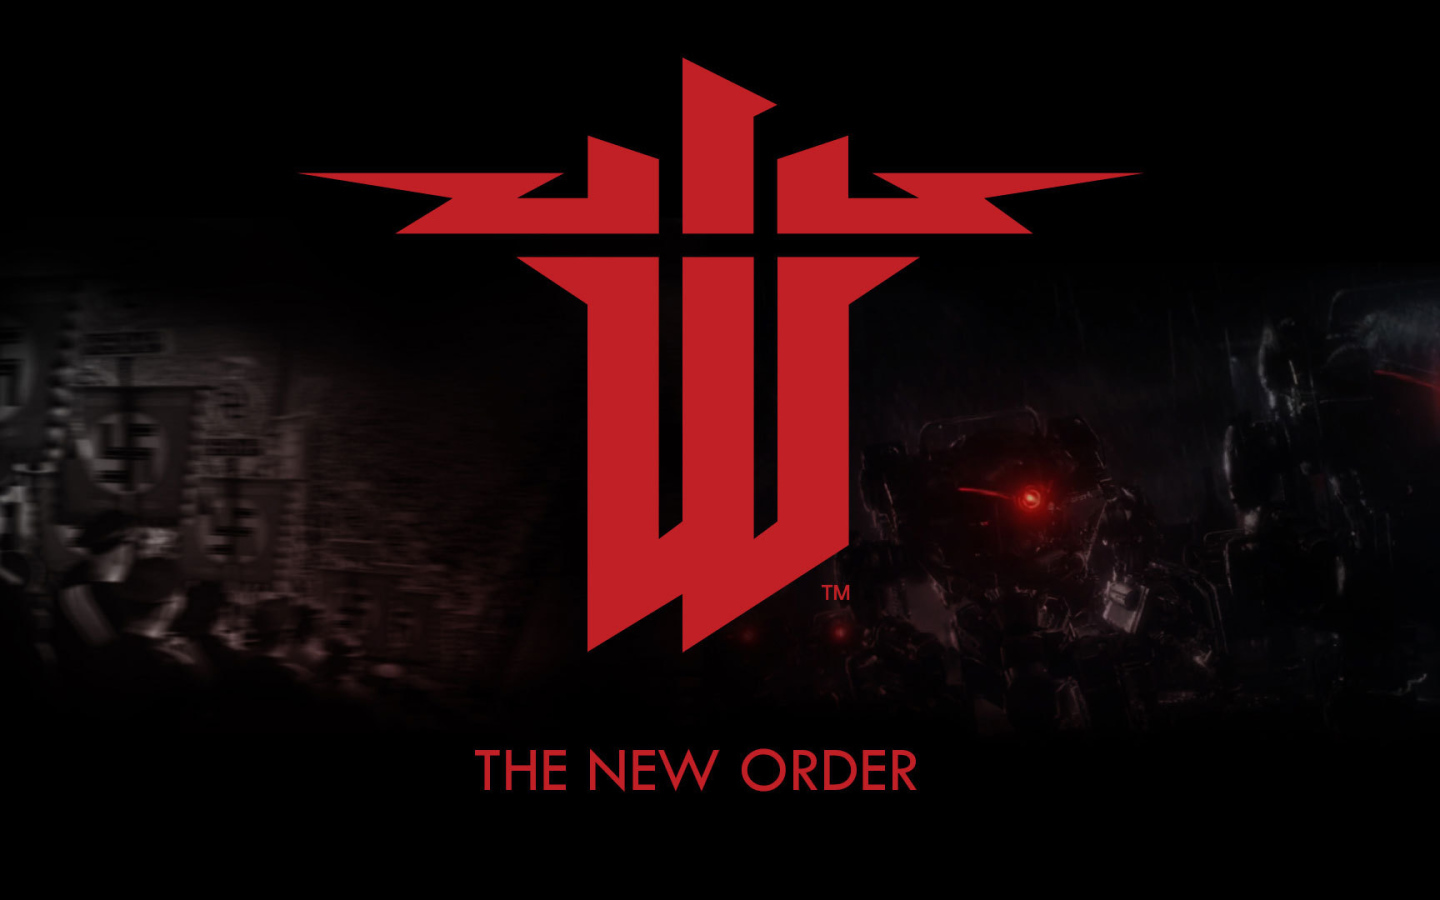 Wolfenstein The New Order: the logo of the game